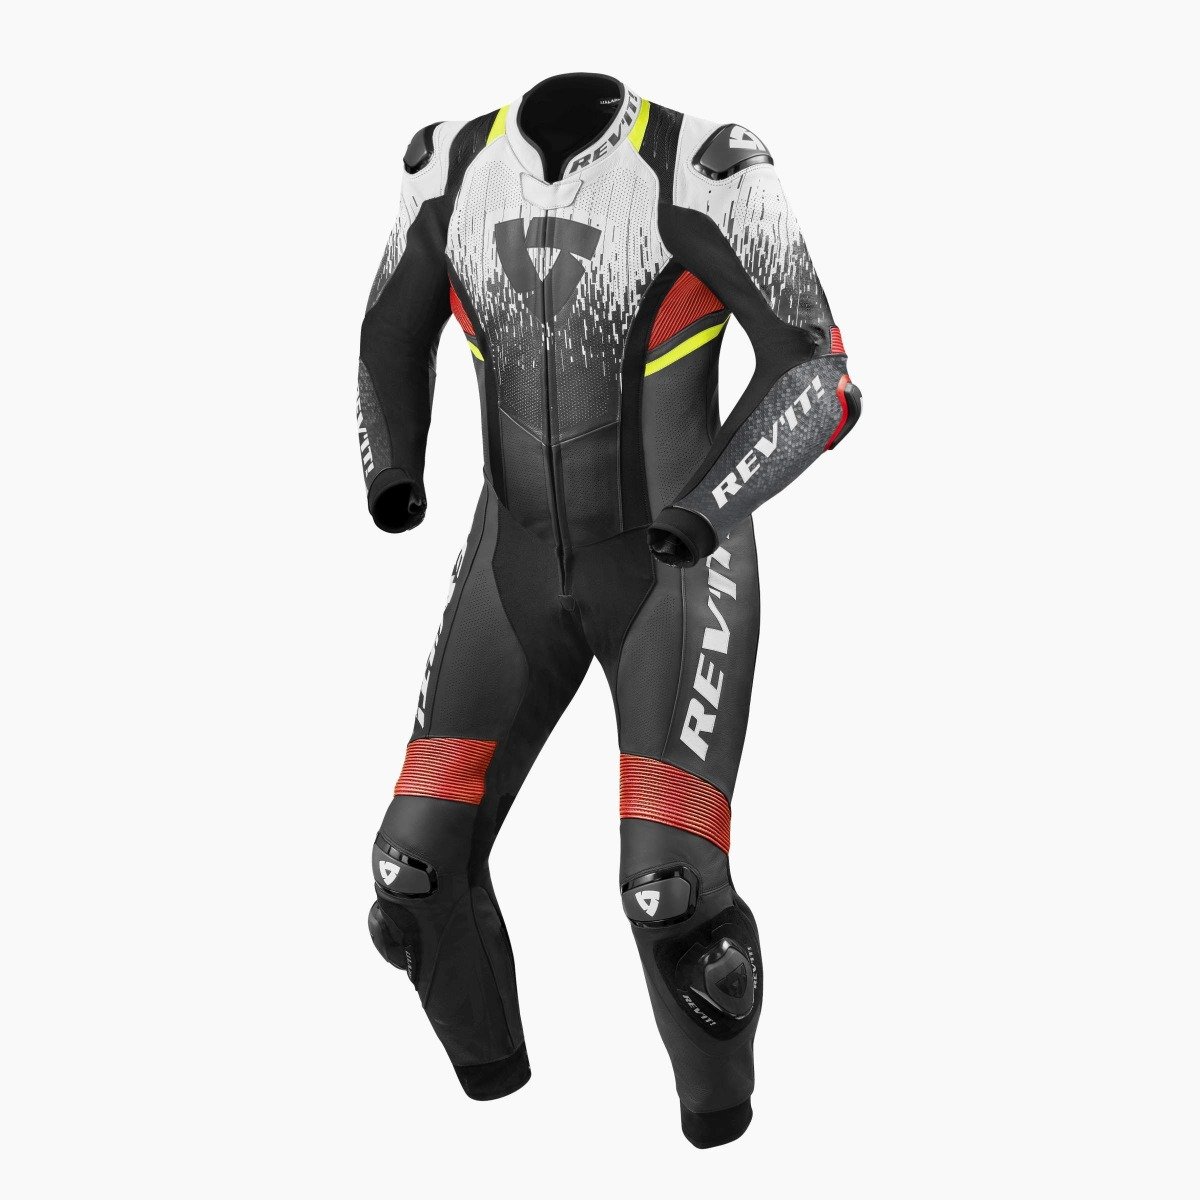 Image of REV'IT! Quantum 2 One Piece Racing Suit White Neon Red Size 50 ID 8700001313414